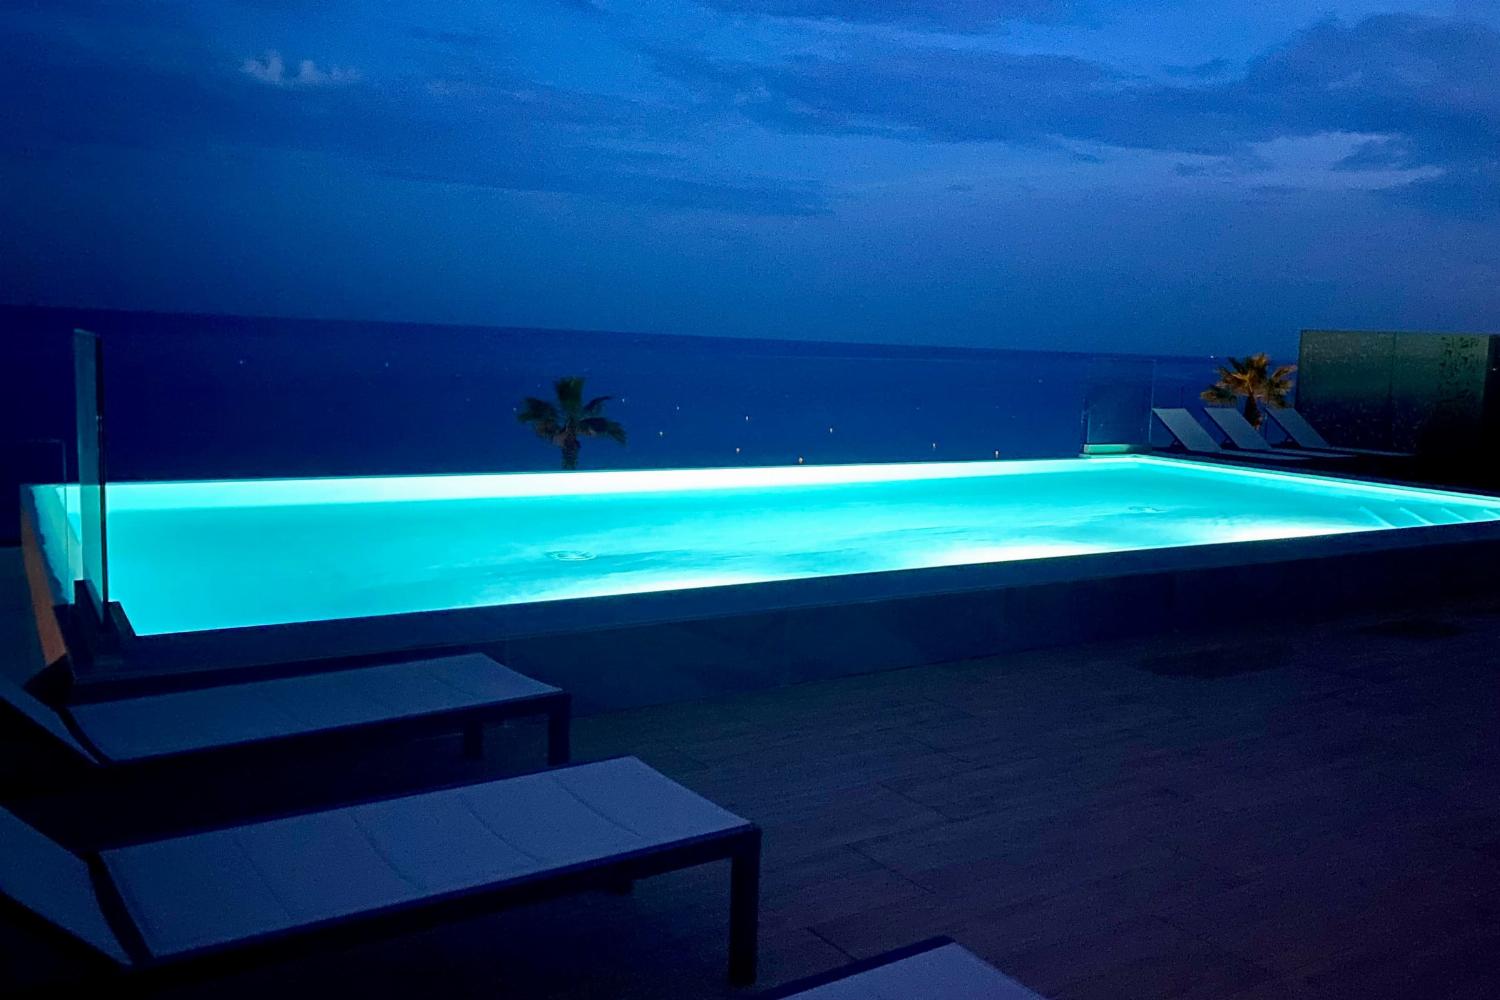 Shared pool at night with sea view